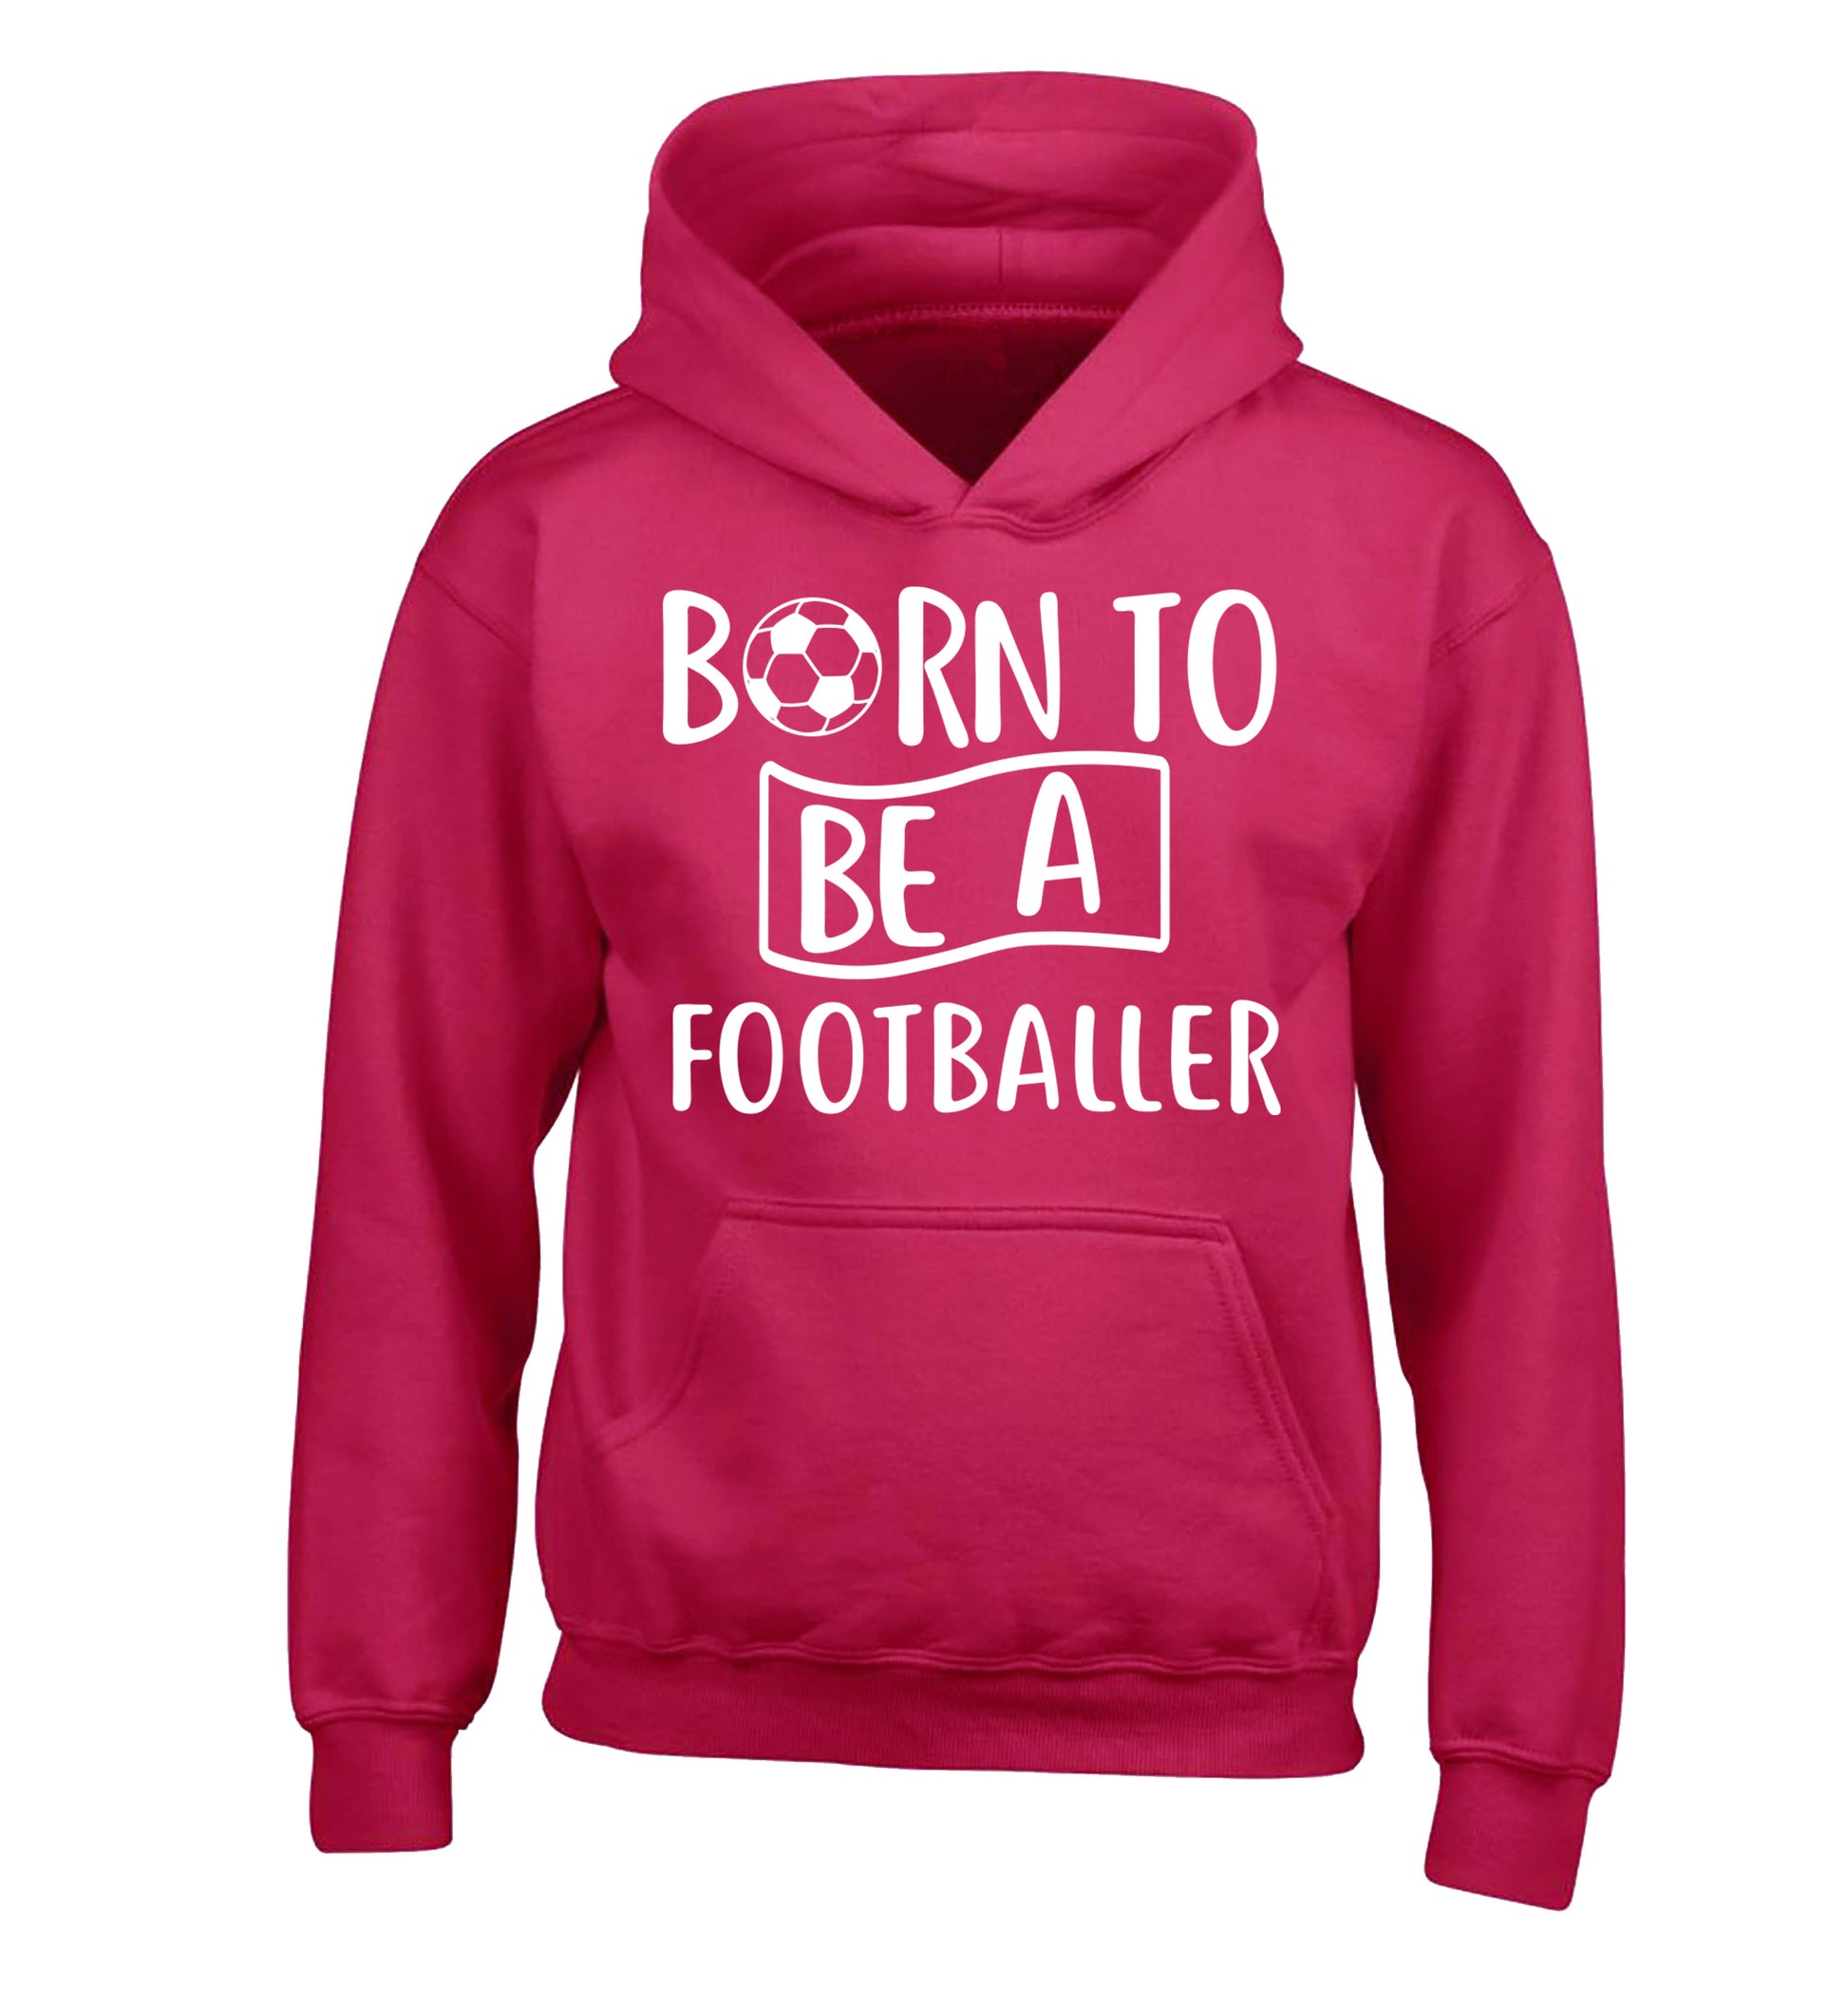 Born to be a footballer children's pink hoodie 12-14 Years